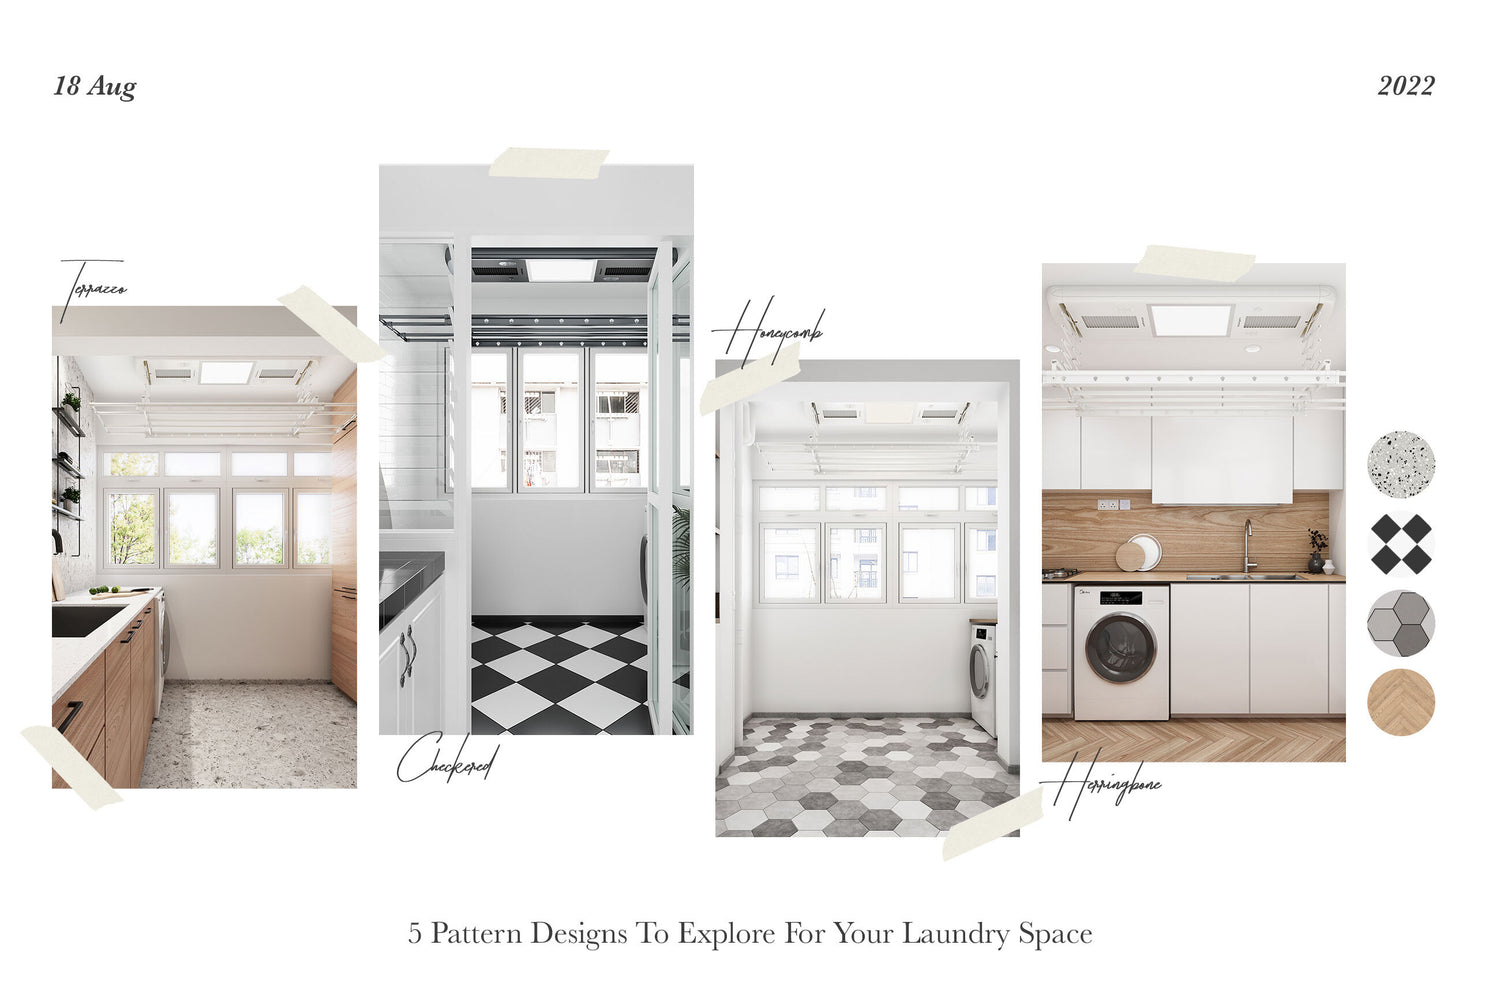 5 Pattern Designs To Explore For Your Laundry Space